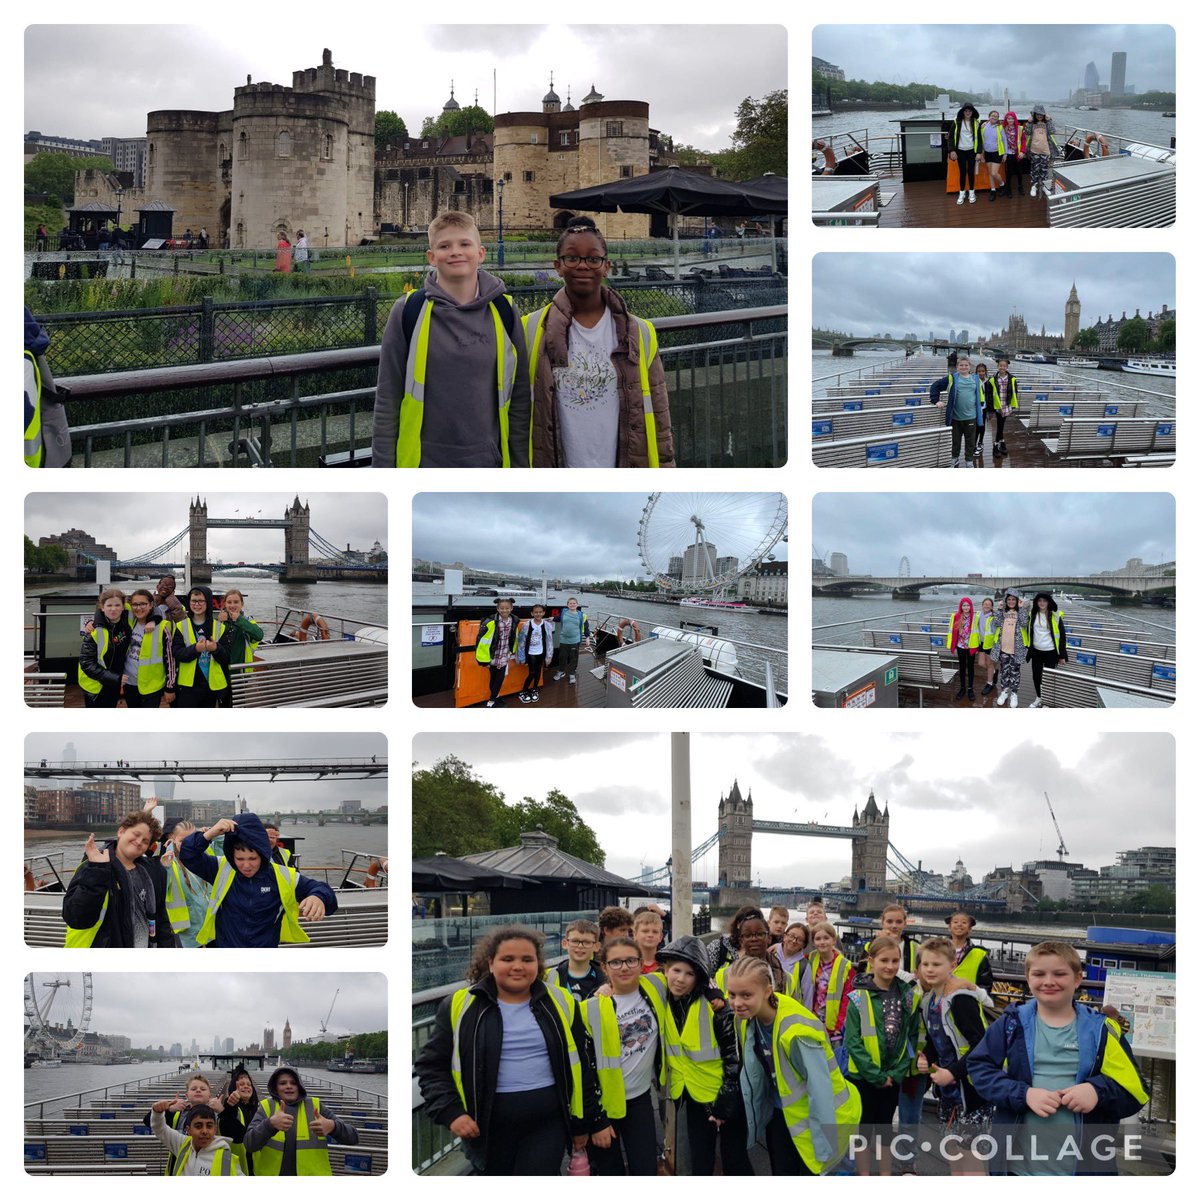 #SheridanClass have been spotting landmarks around London. Can you name any? #CulturalCapital